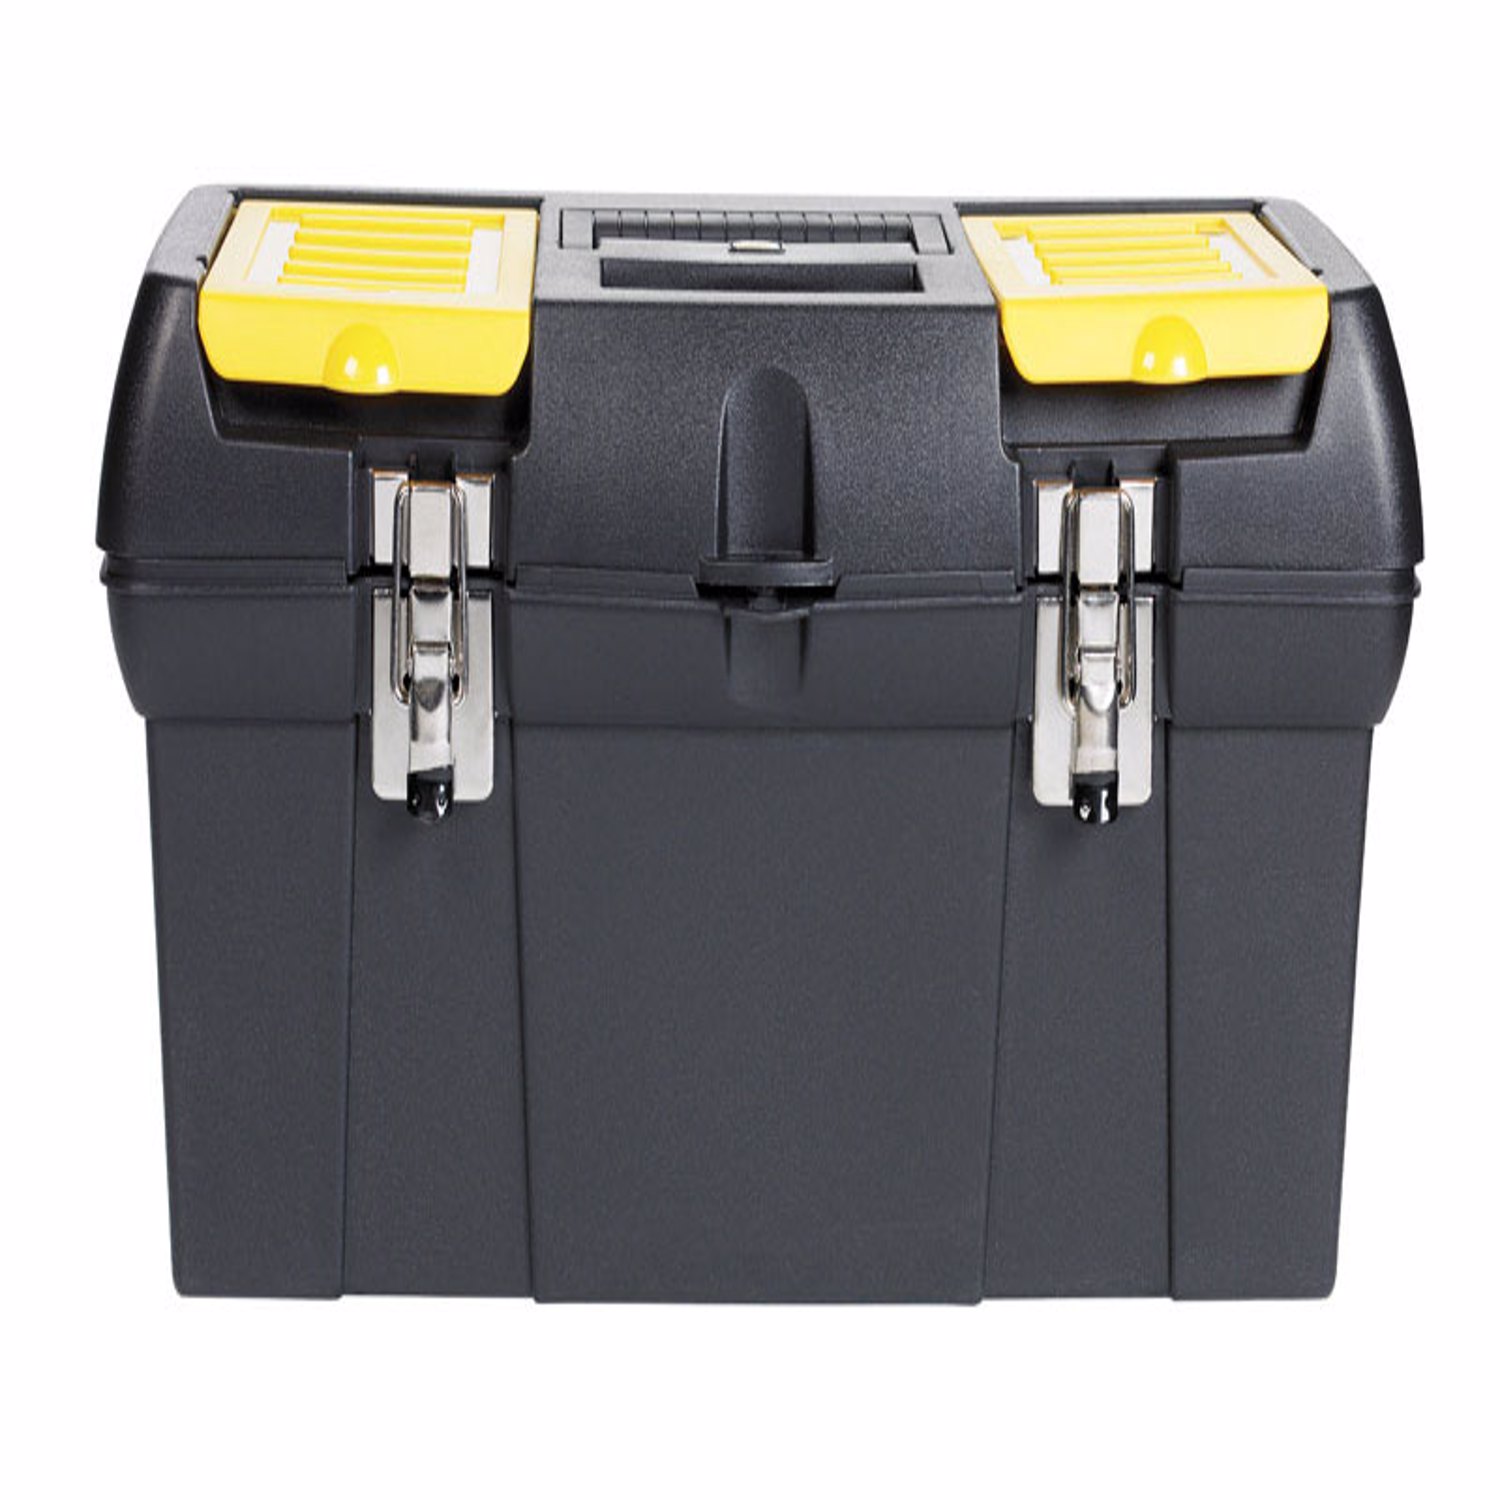 Photos - Tool Box Stanley 19.2 in. Toolbox Black/Yellow 019151M 